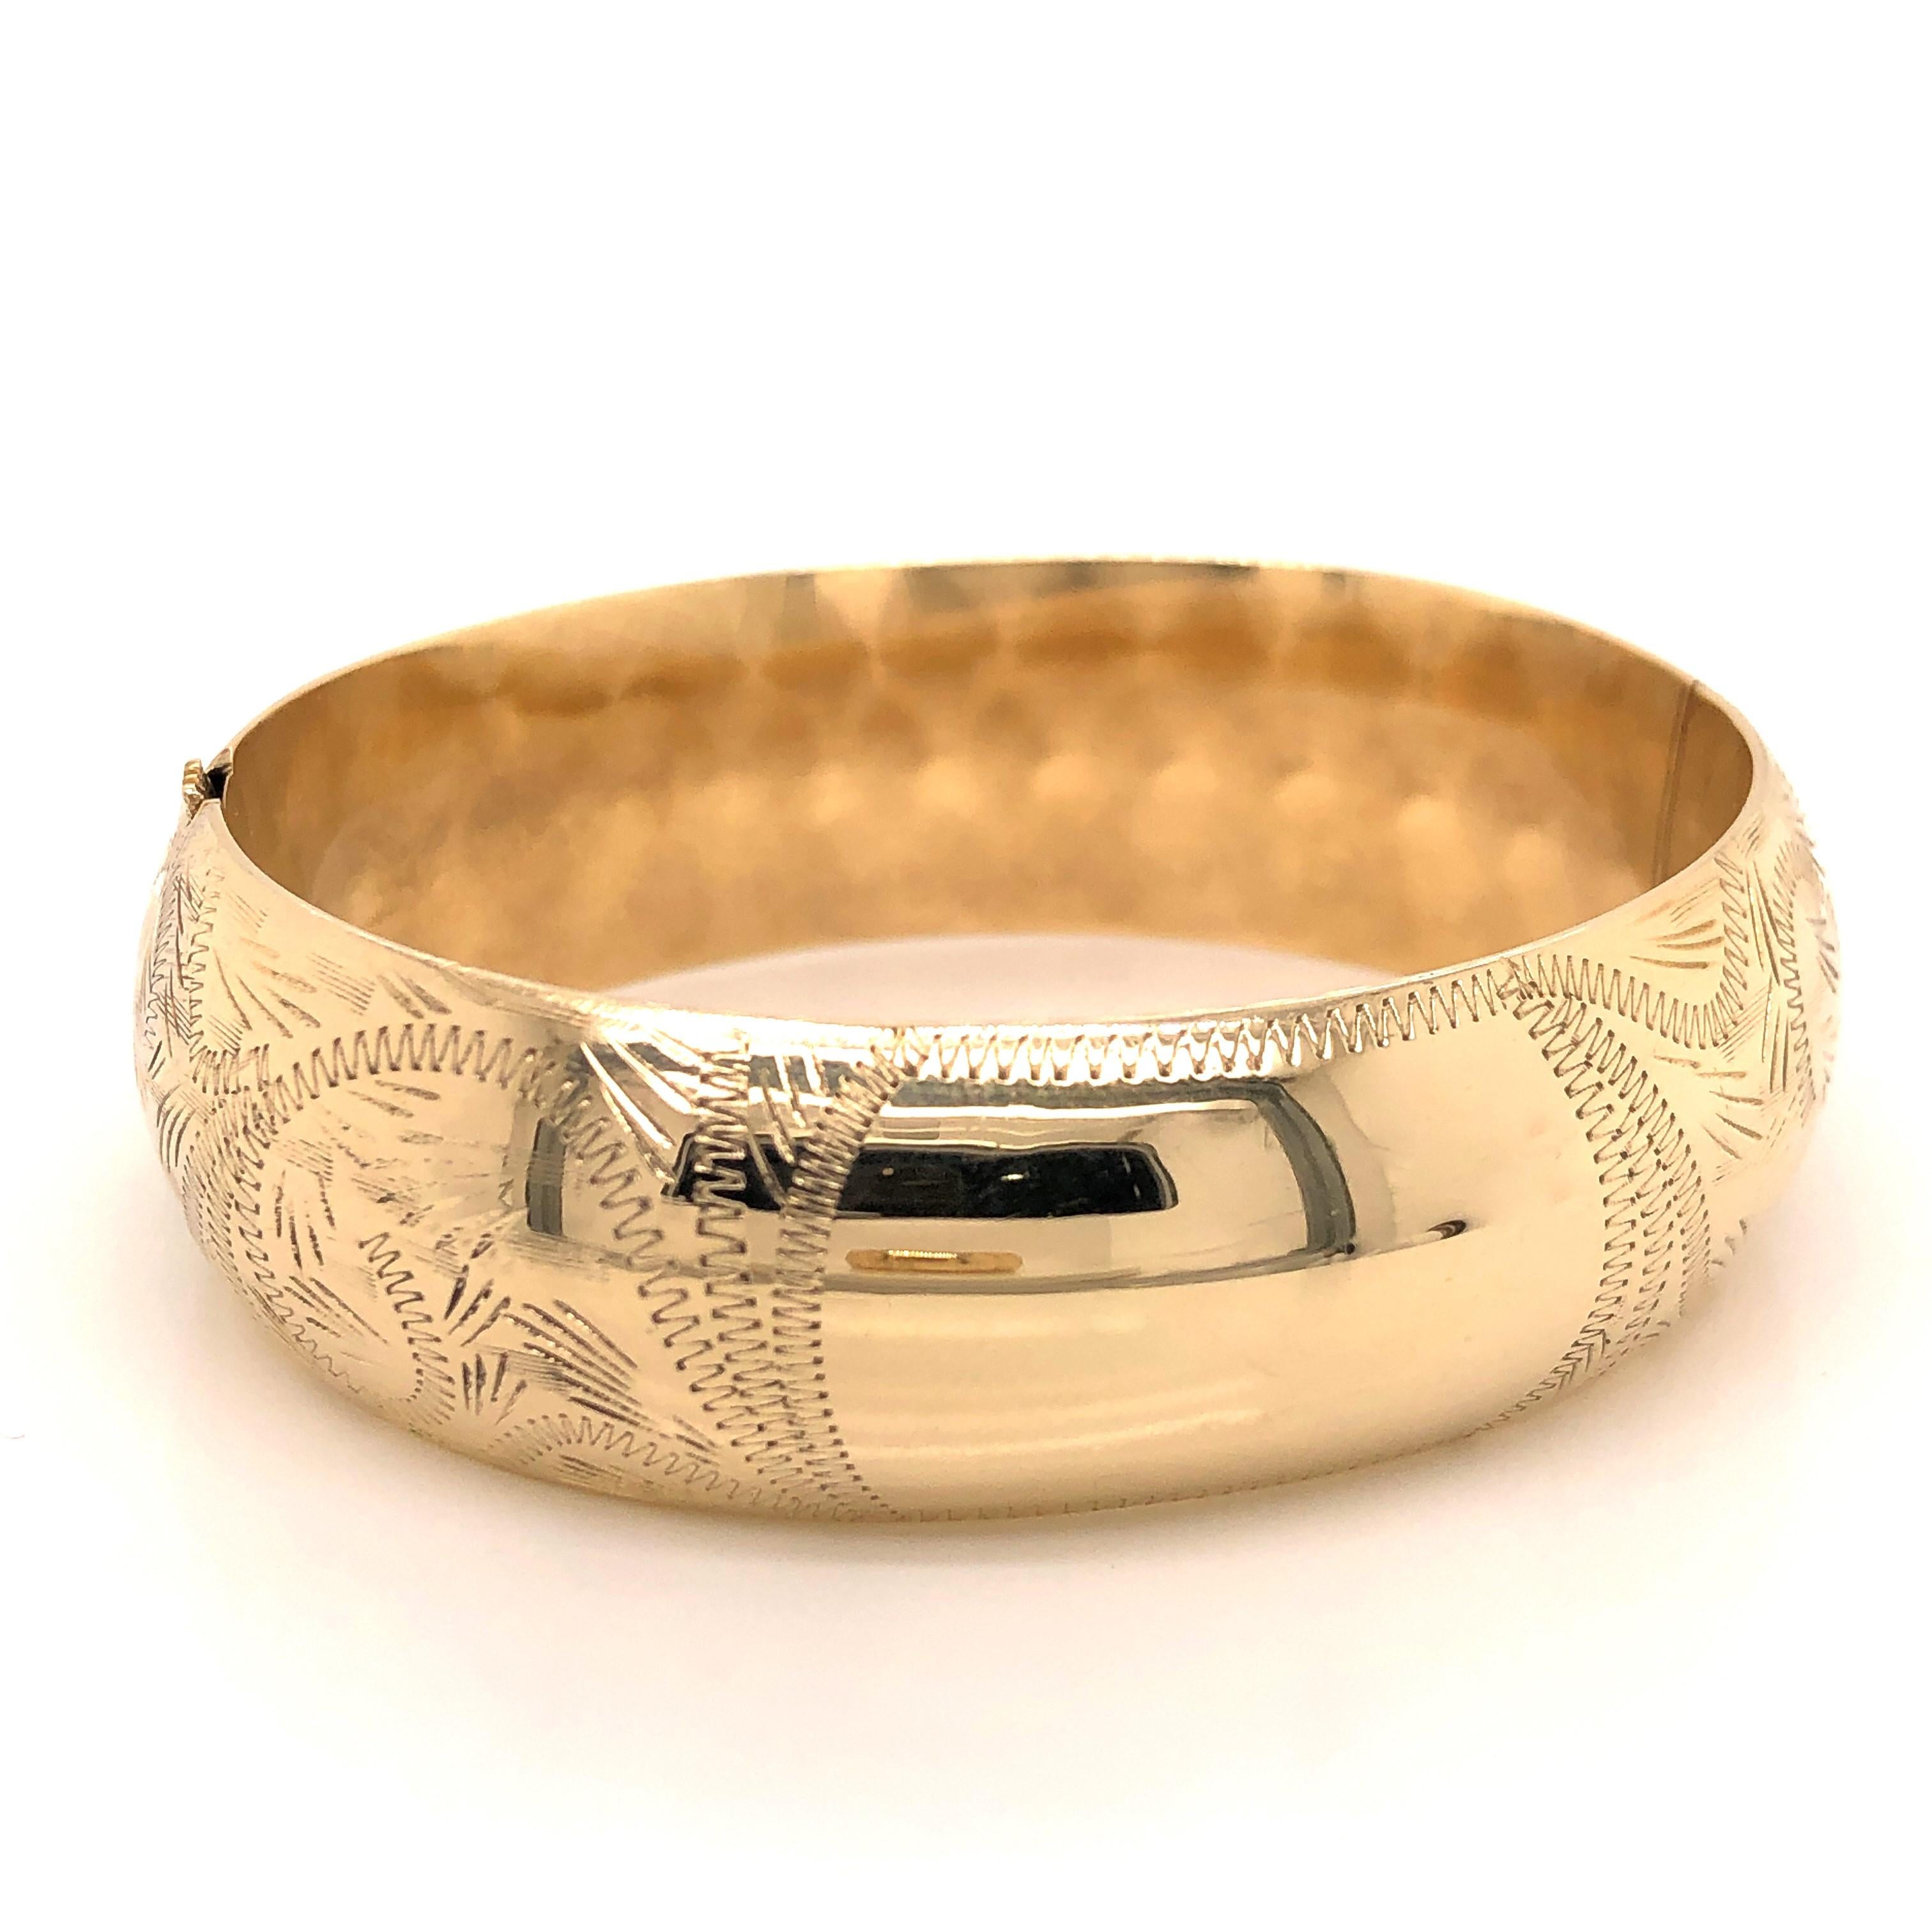 In bright polished fourteen karat yellow gold, this beautifully hand engraved Antique bangle bracelet will be a constant in your jewelry wardrobe.
Measures 2-1/4 x 2 inches with a 6-1/2 inch radius.  At 3/4 inch in width, the attractive rounded face